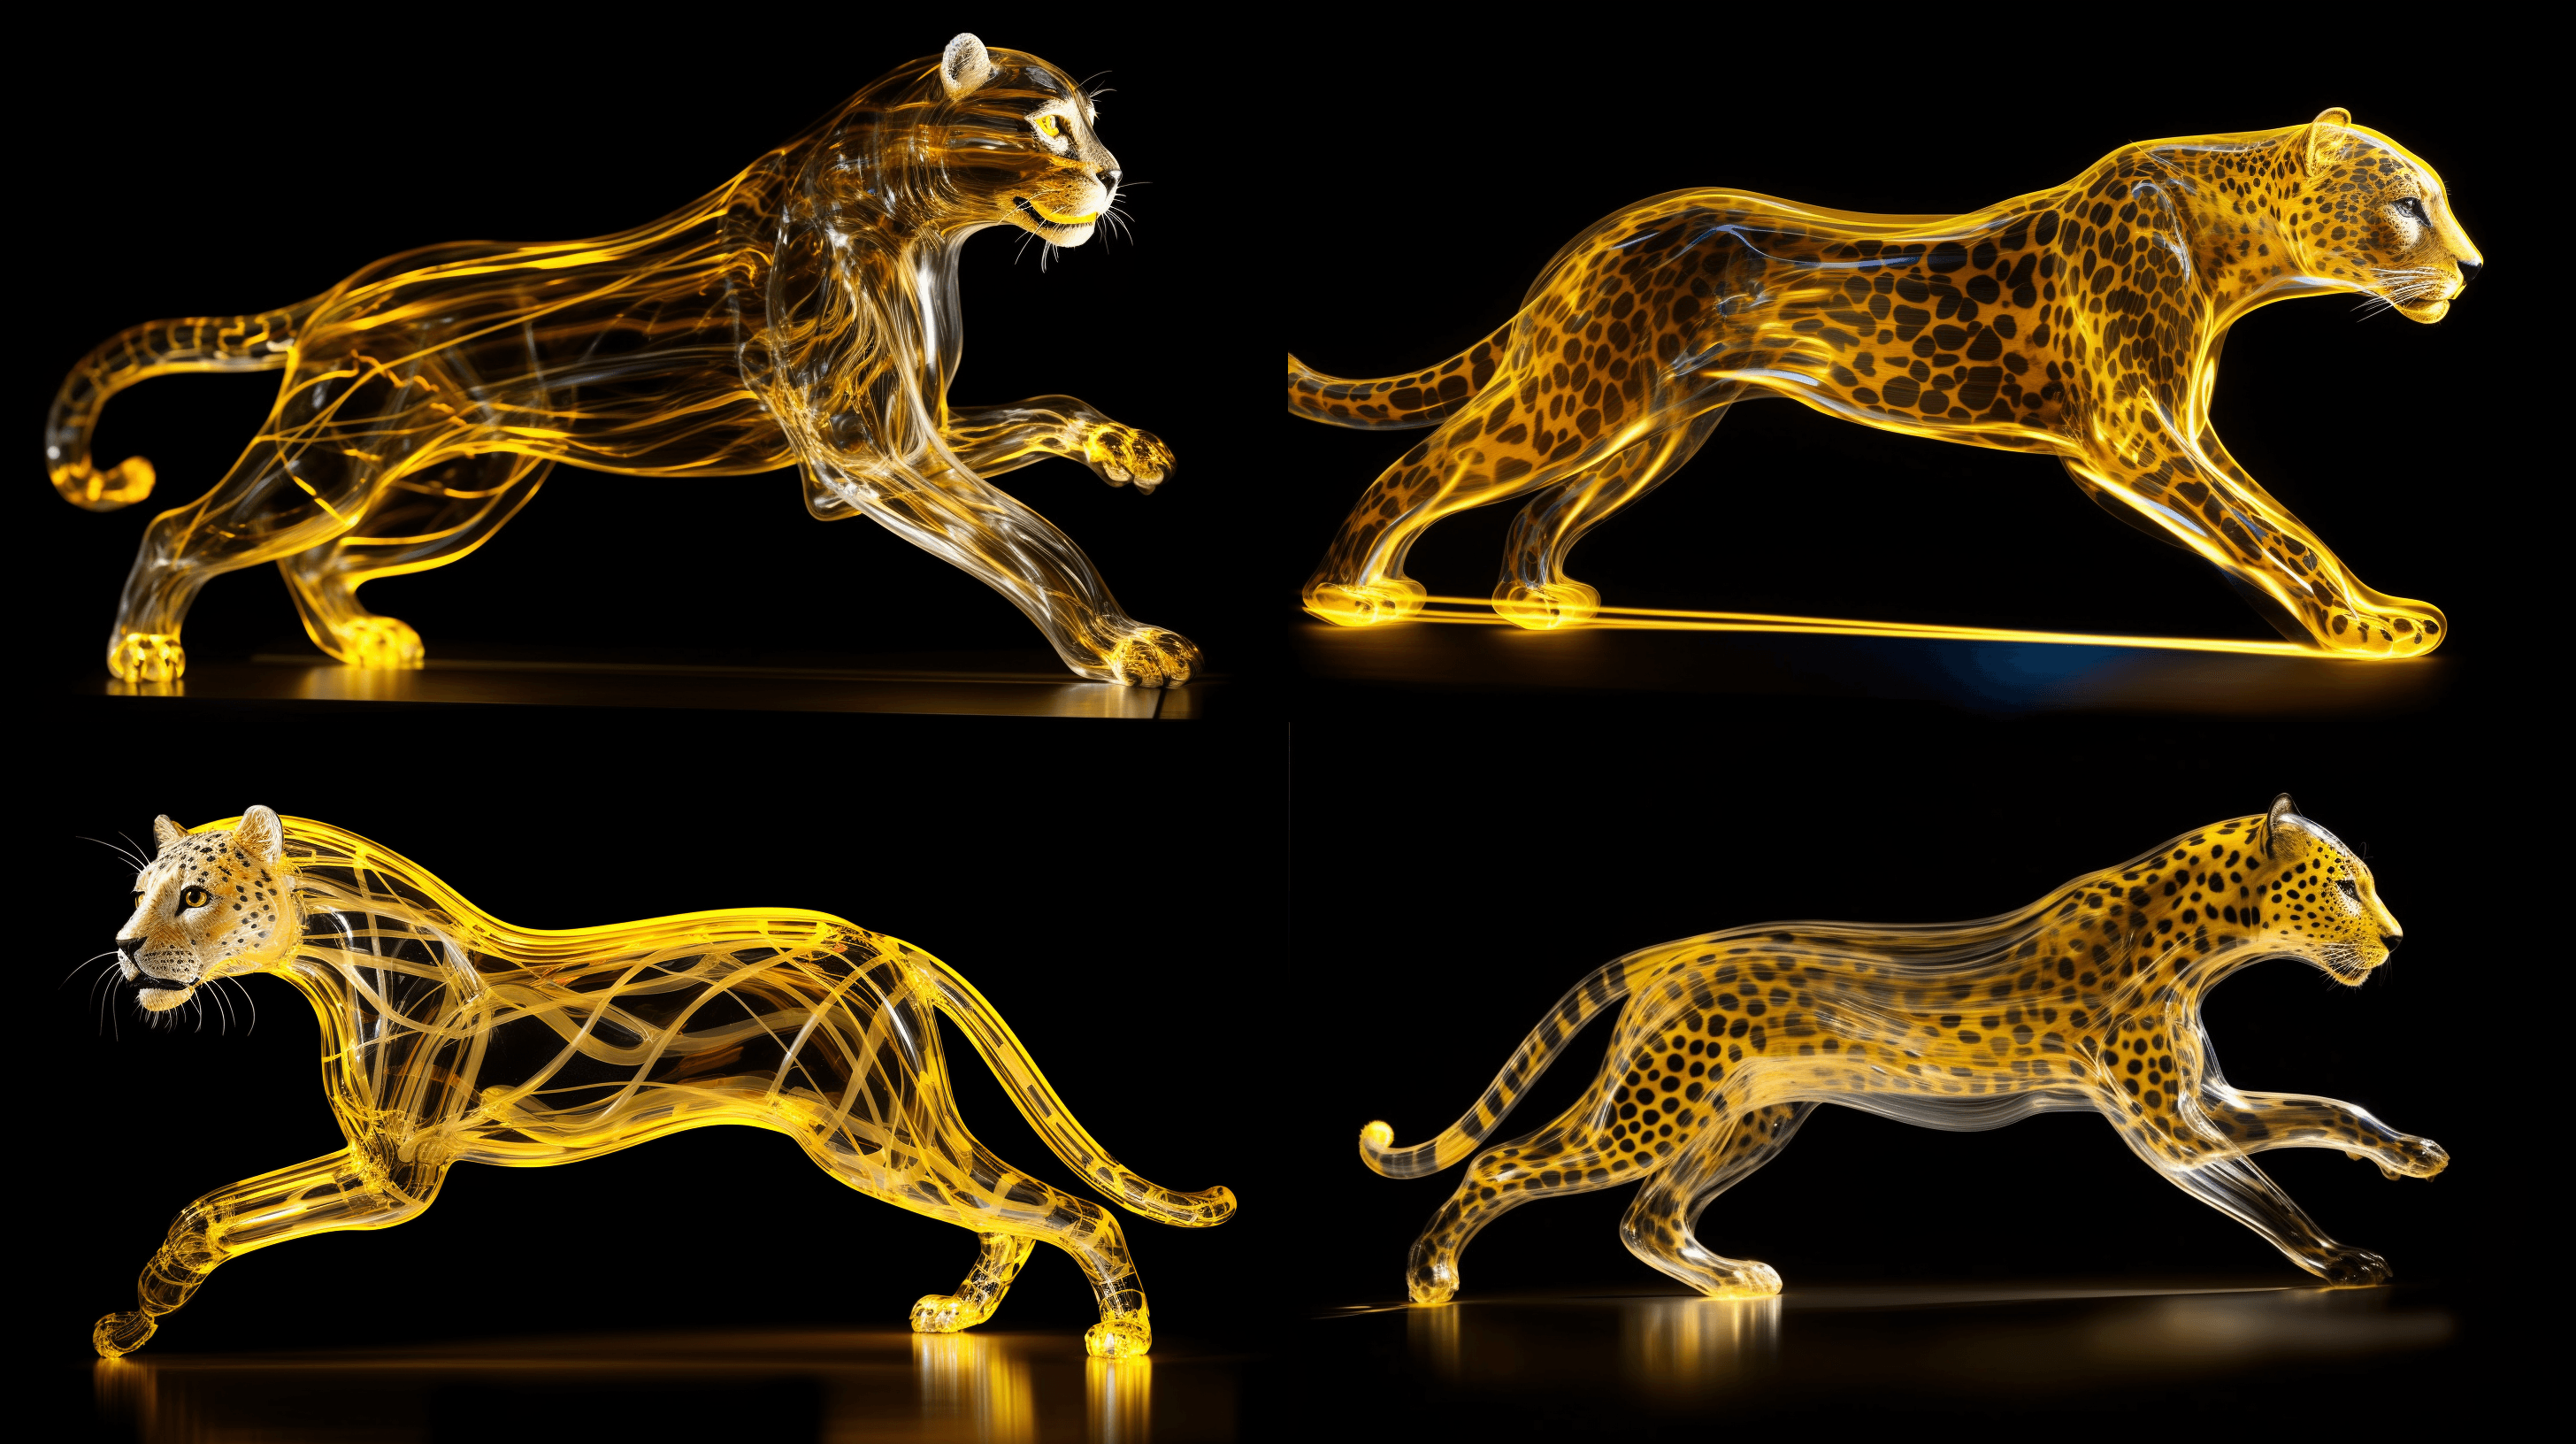 light sculpture | sprinting cheetah | soft yellow and black lights | swirling lights forming the figure of a cheetah | mirrors and diffusers to create a swift, dynamic figure | yellow and black | raw power and speed | observer feels they are watching a wild chase | fast shutter speed to capture the movement | wide aperture --ar 16:9 --style raw